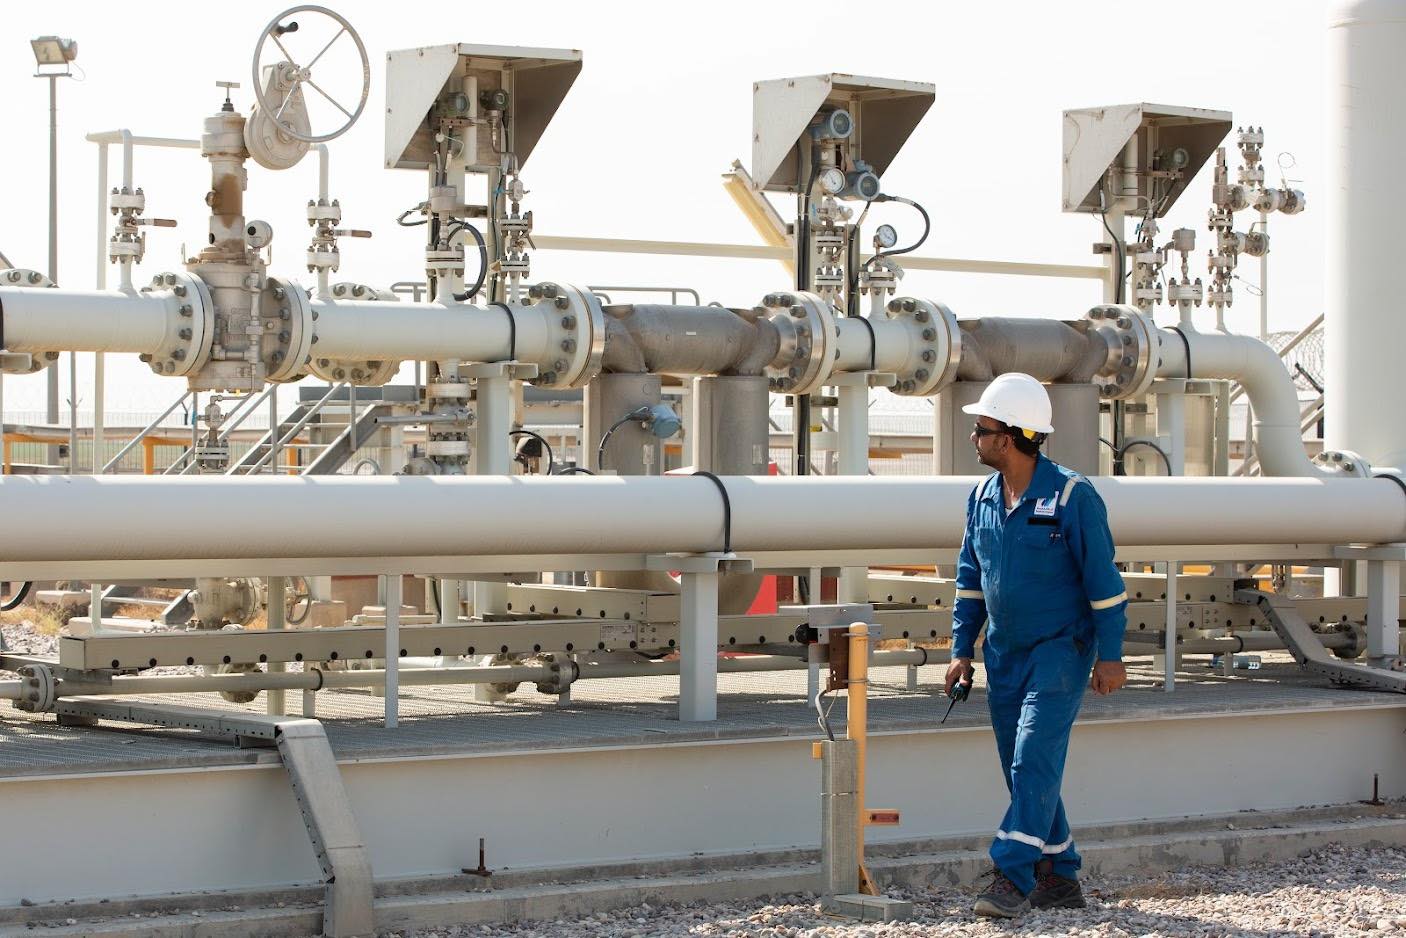 Iraq's oil exports soared in September